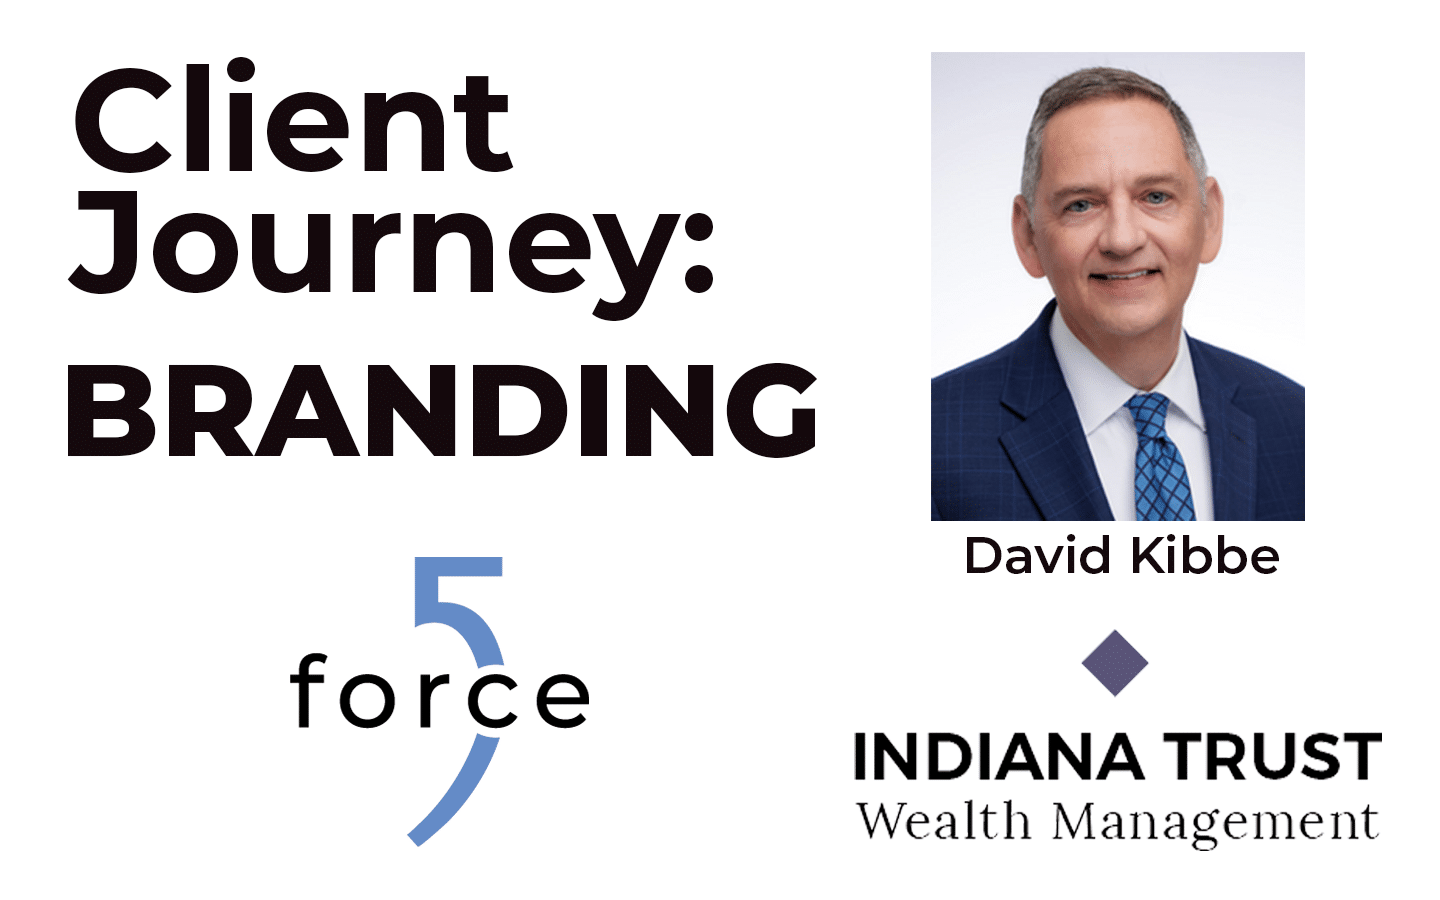 Featured image for “Indiana Trust Wealth Management’s Brand Journey”